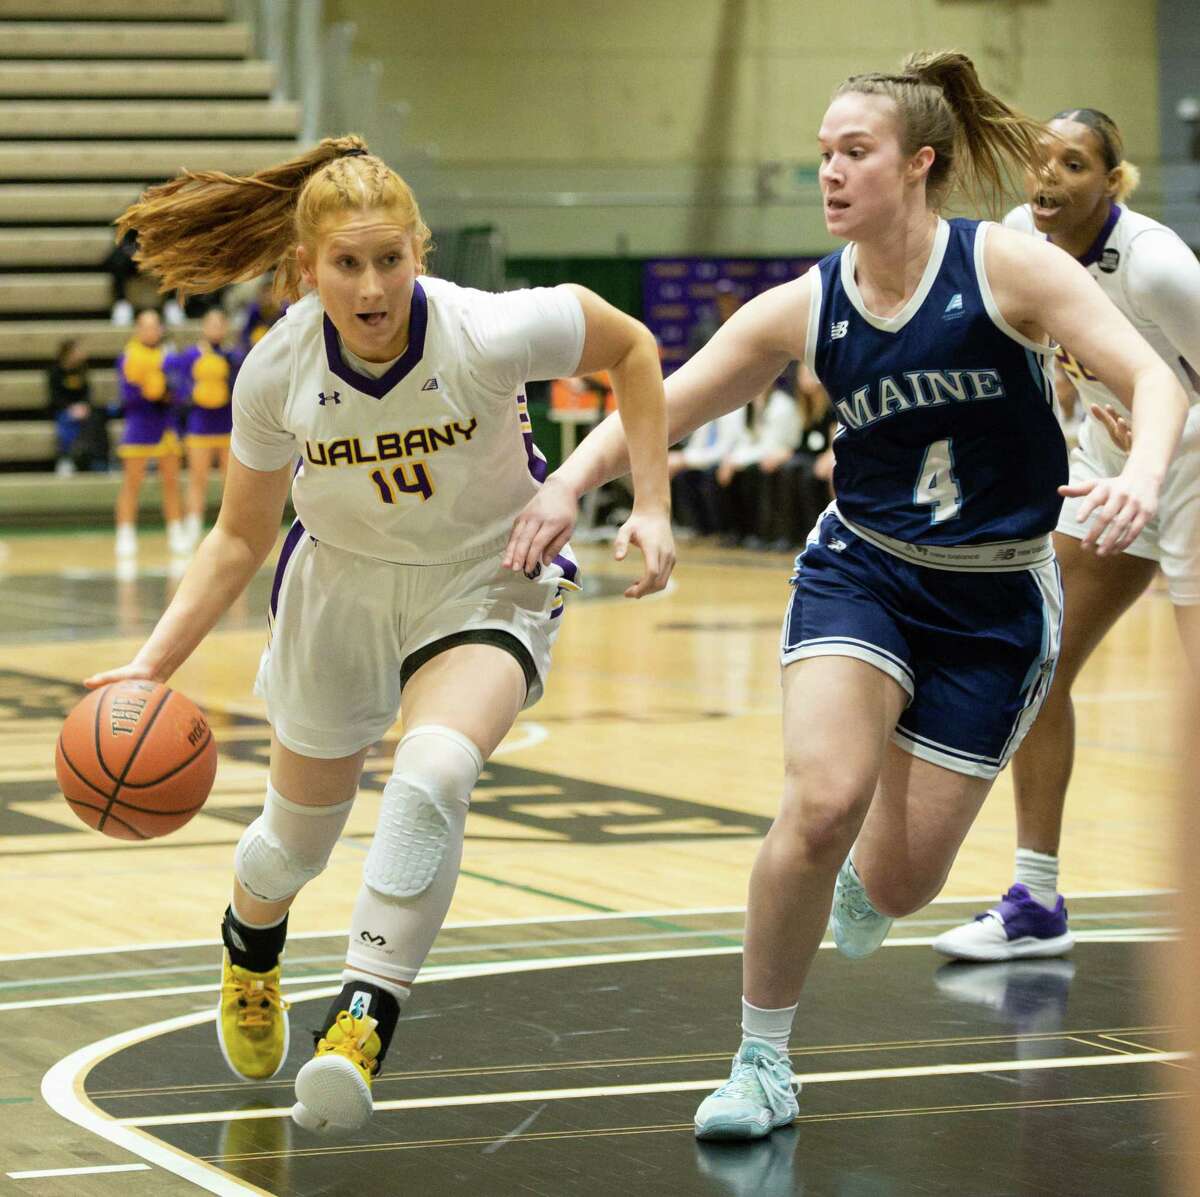 UAlbany’s Grace Heeps, left, said the team got a boost from beating Maine this past Saturday, which would help prevent the Great Danes from collecting any rust during their bye week.